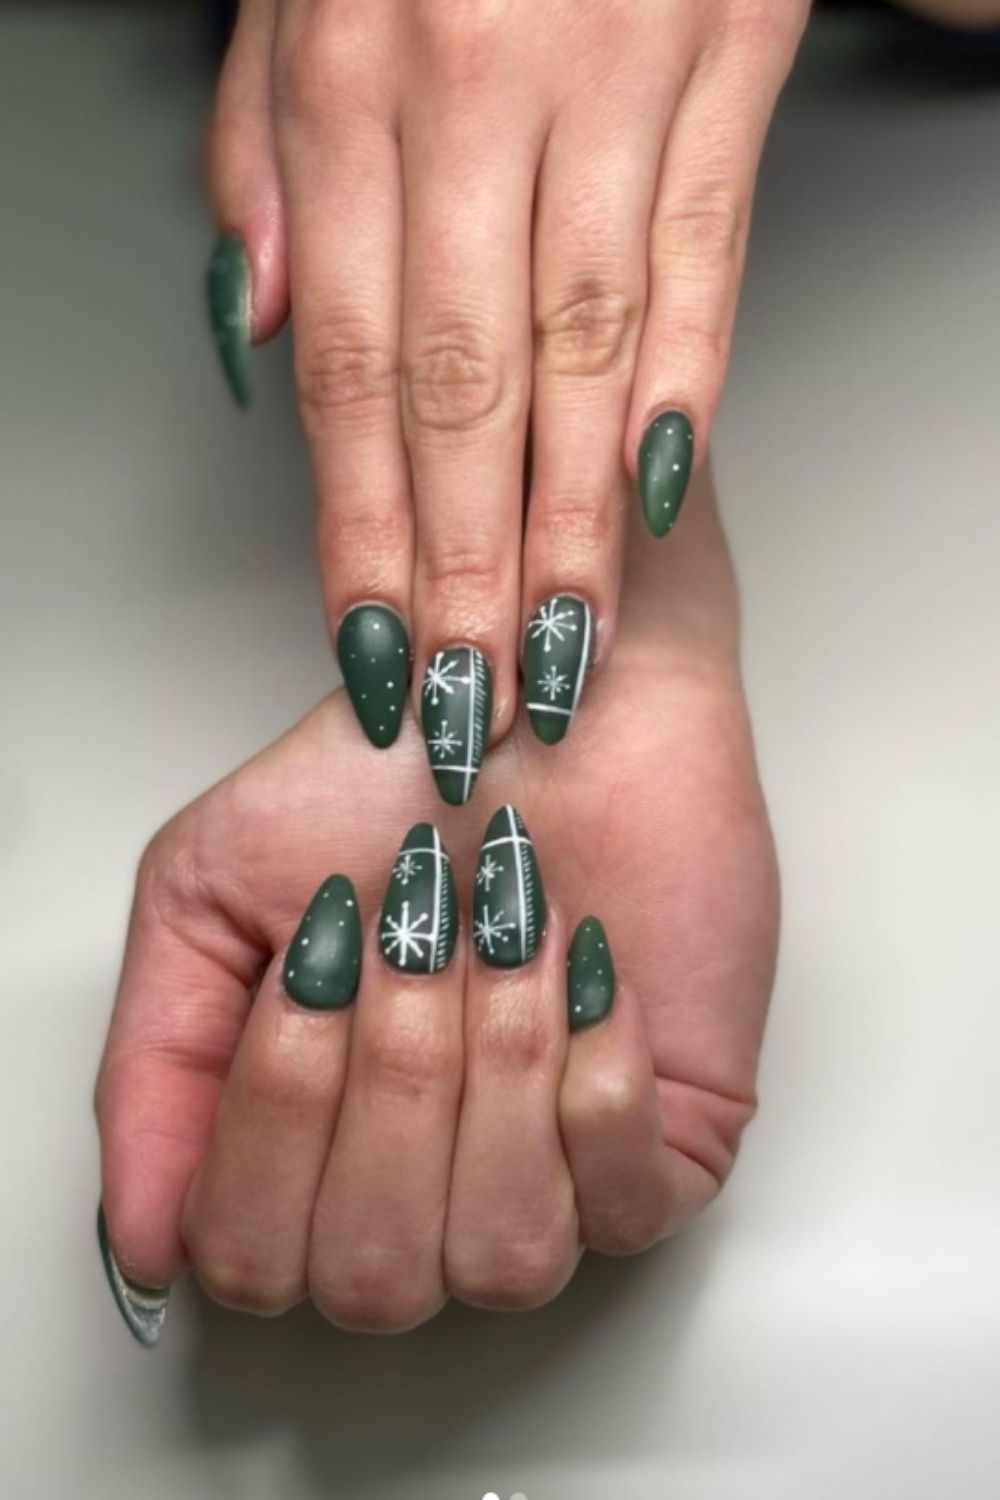 Green and white nails 